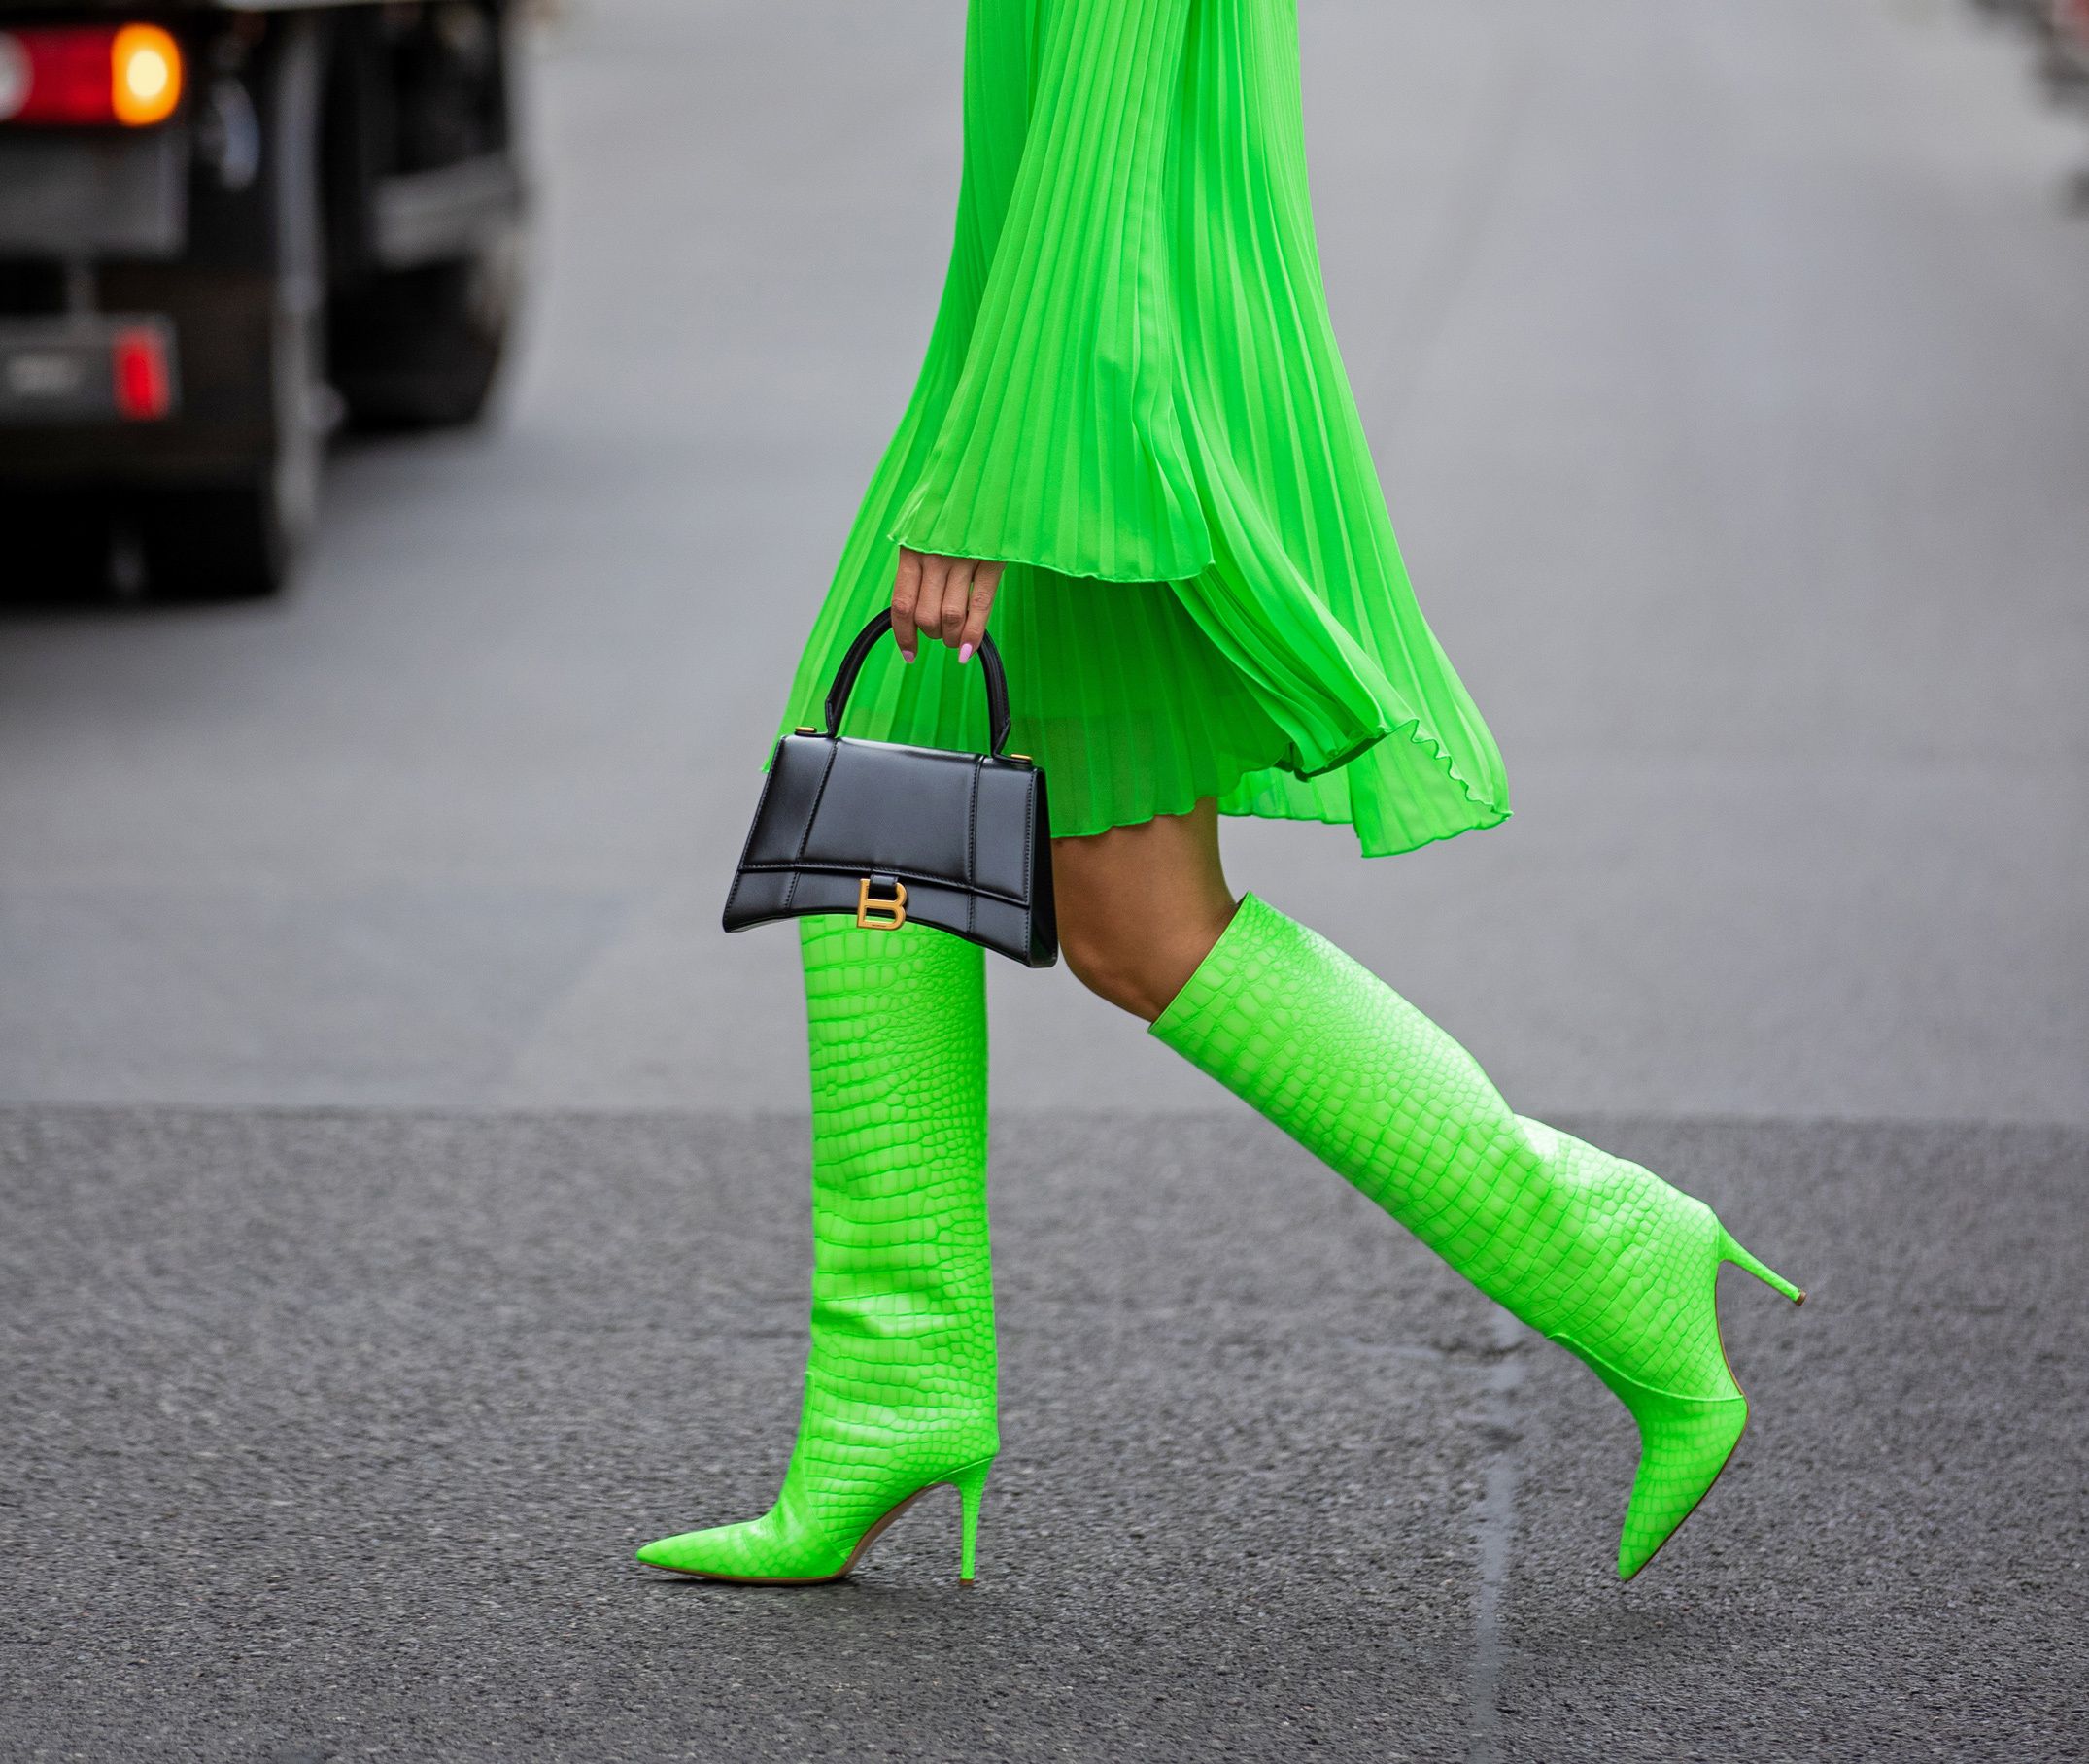 The 12 Major Spring/Summer 2023 Shoe Trends And How To Shop Them Now |  British Vogue